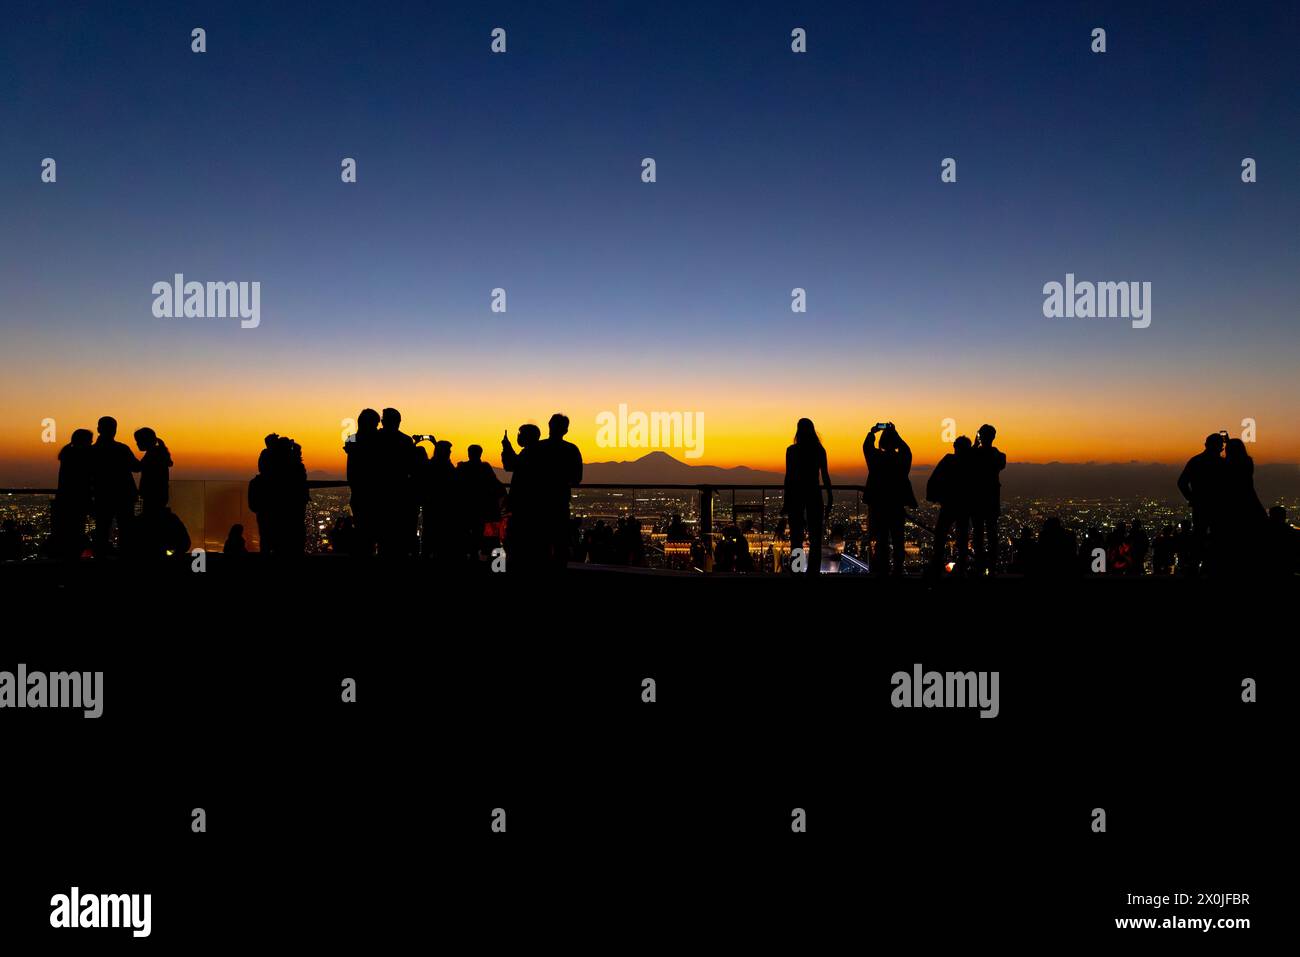 Silhouettes of people against a vibrant sunset , fuji mountain on background Stock Photo